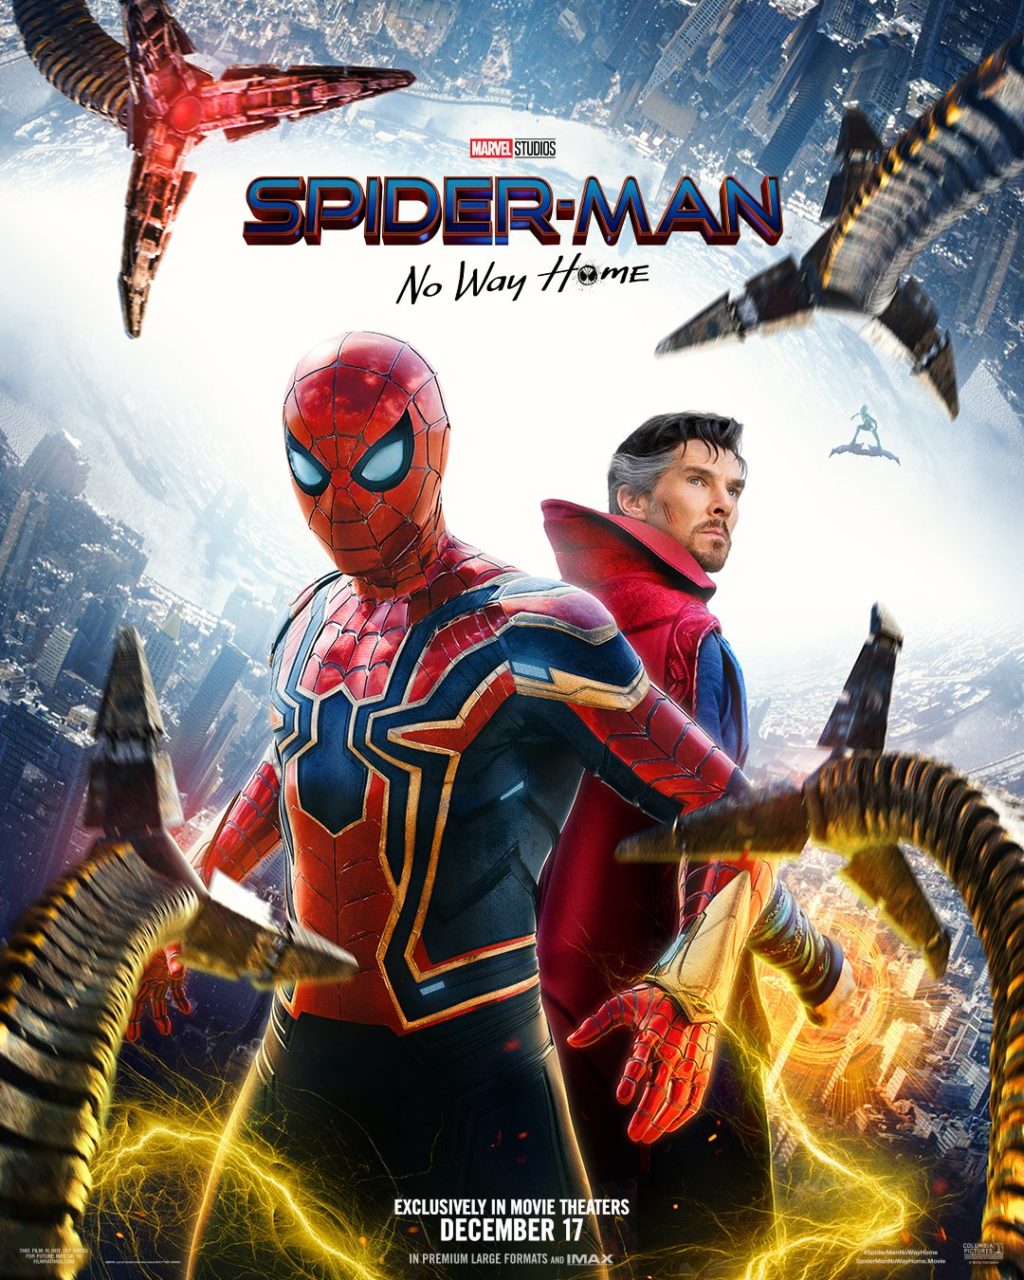 Spider-Man: No Way Home poster (Marvel Studios/Sony Pictures)